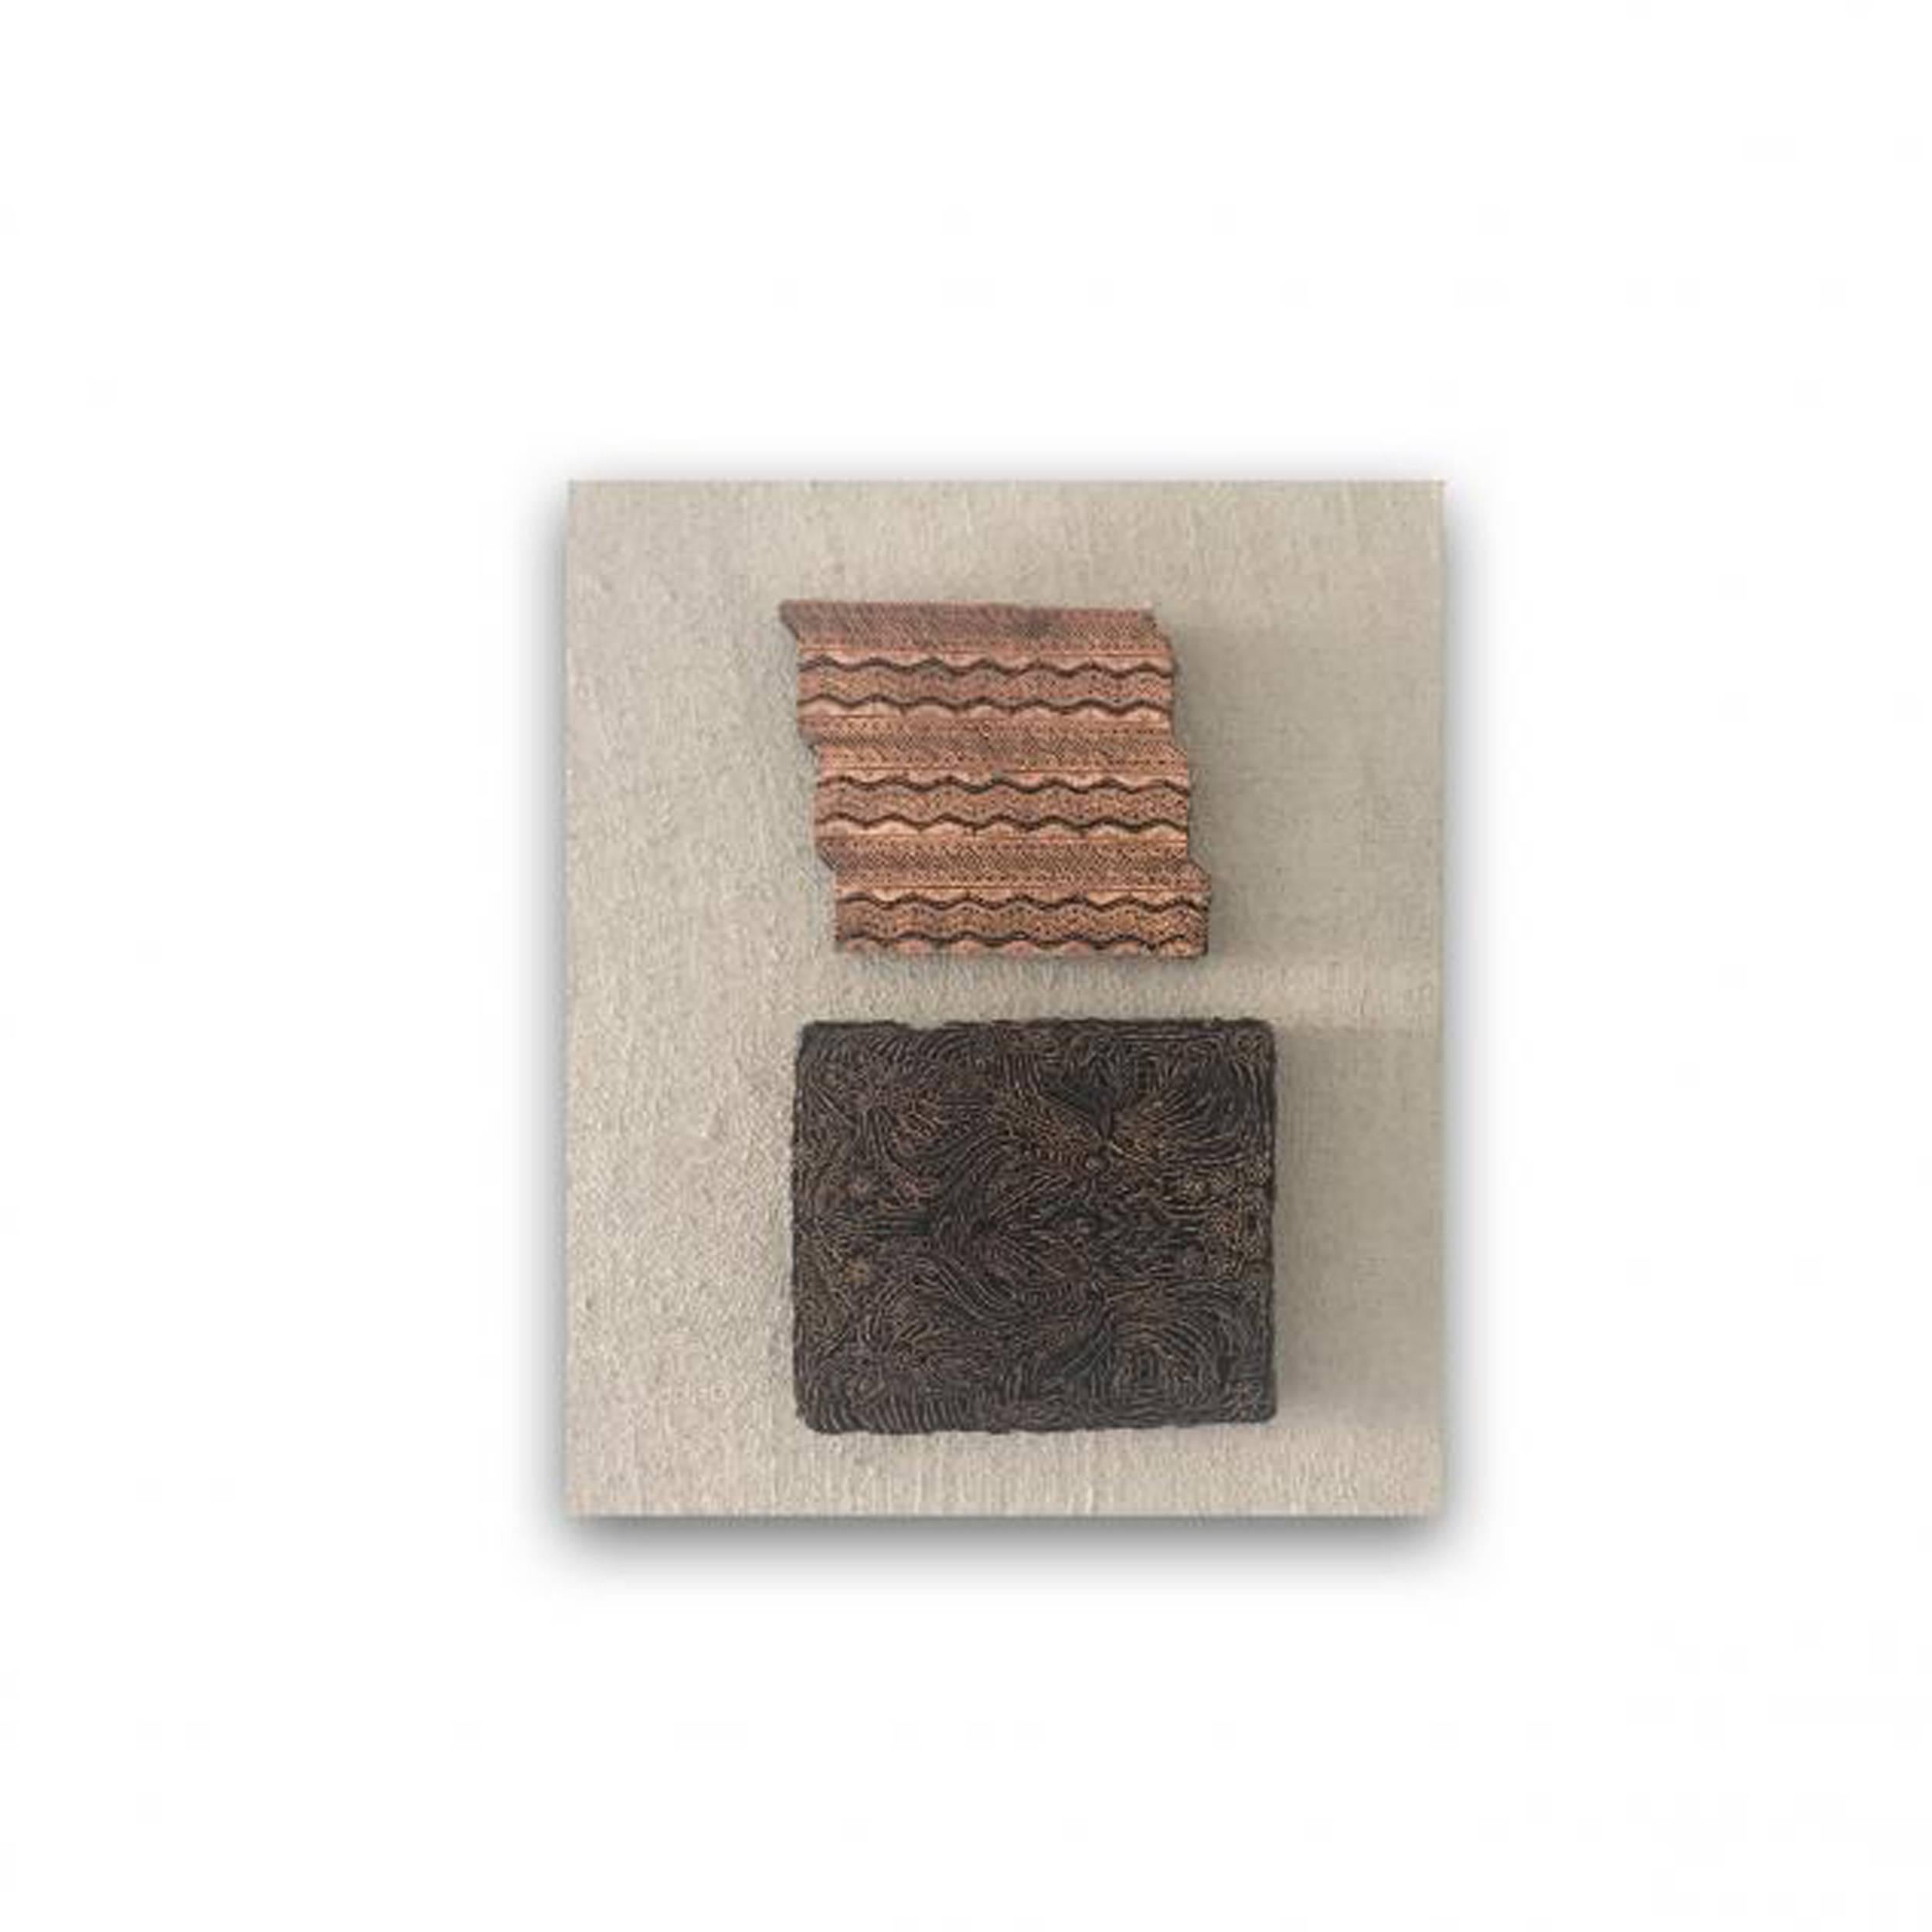 COPPER STAMPS III& IV - Mixed Media Art by Unknown